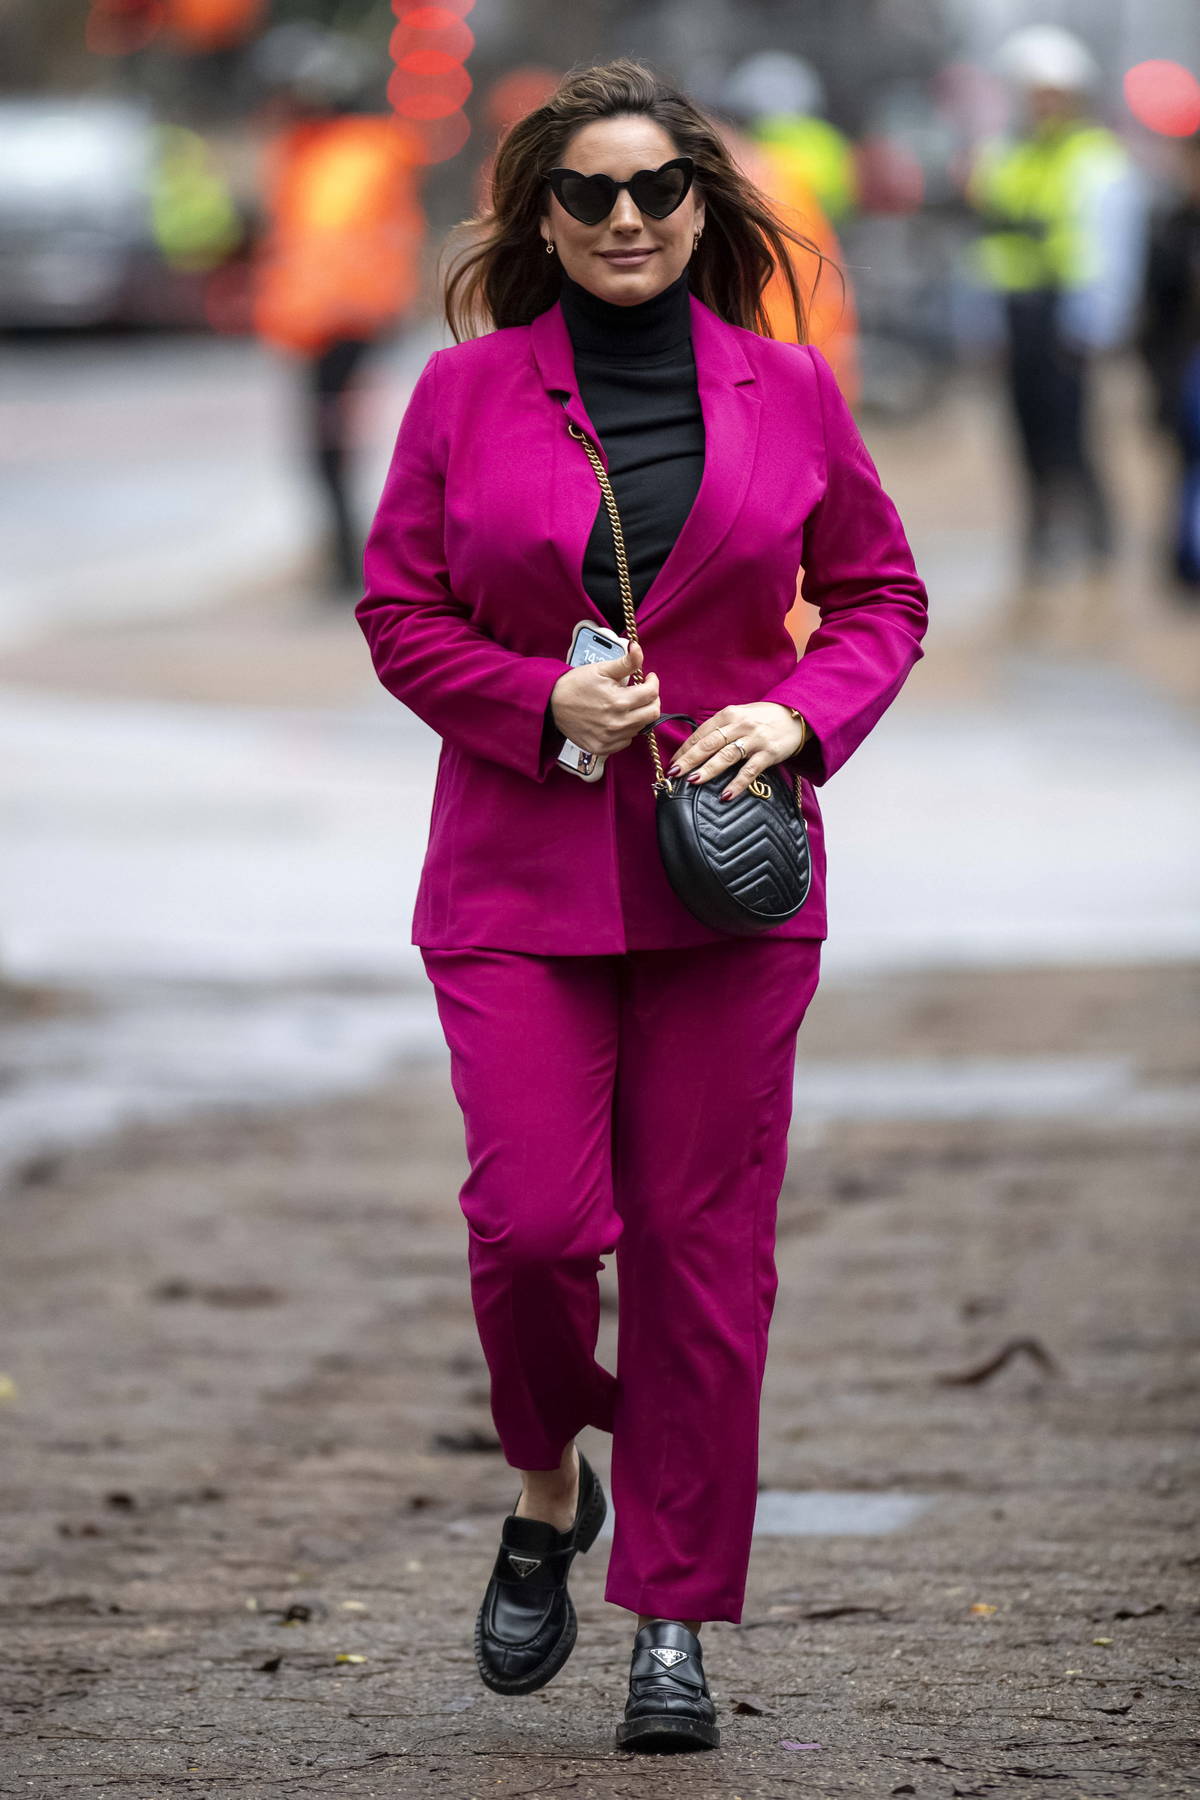 Kelly Brook seen wearing a magenta suit while filming a SlimFast advert with Big Narstie in Central London, UK